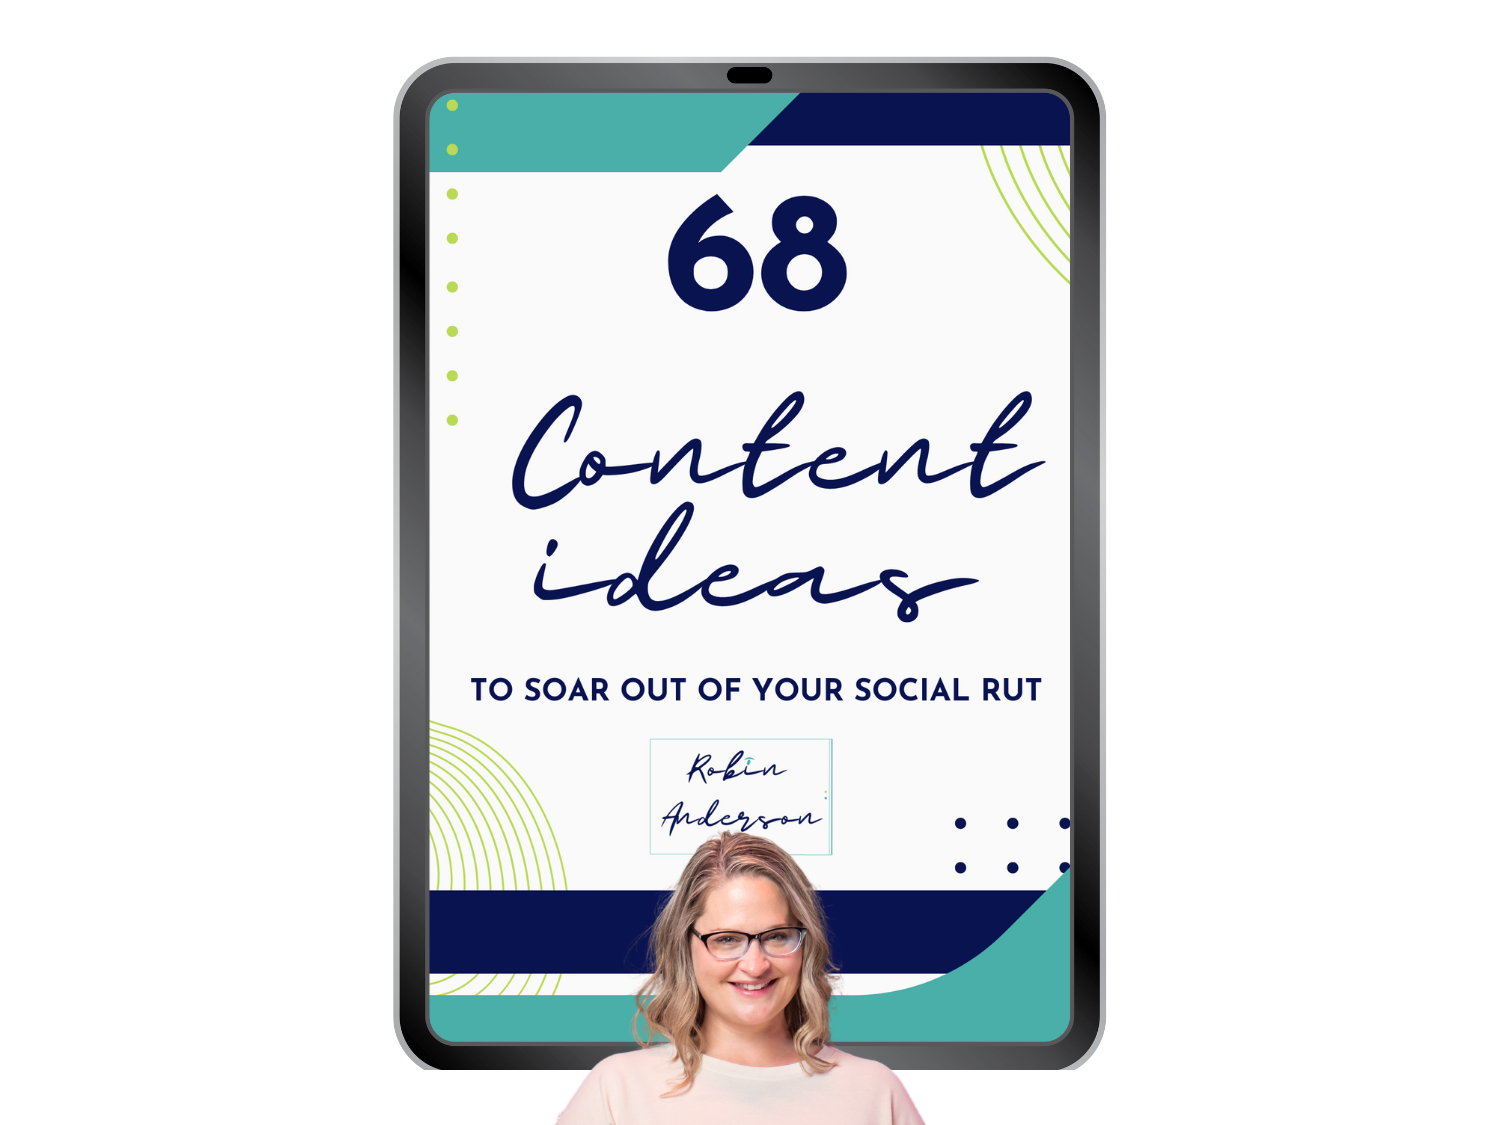 68 content ideas to soar out of your social rut. Teal navy and lime green decals.